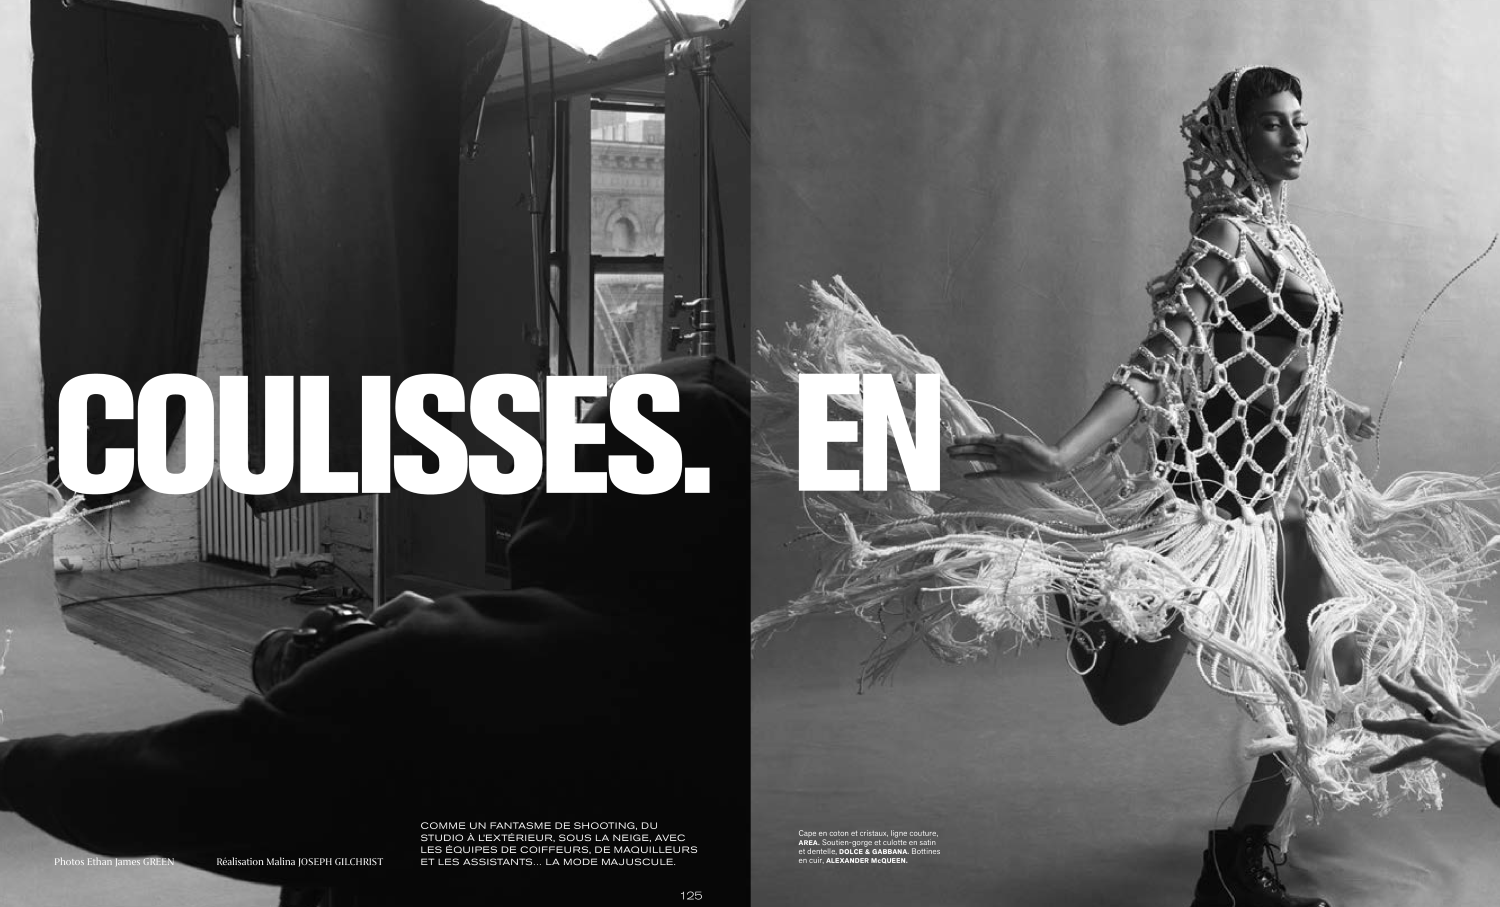 Imaan Hammam by Ethan James Green M Le Mag du Monde 2-27-21 (3).png